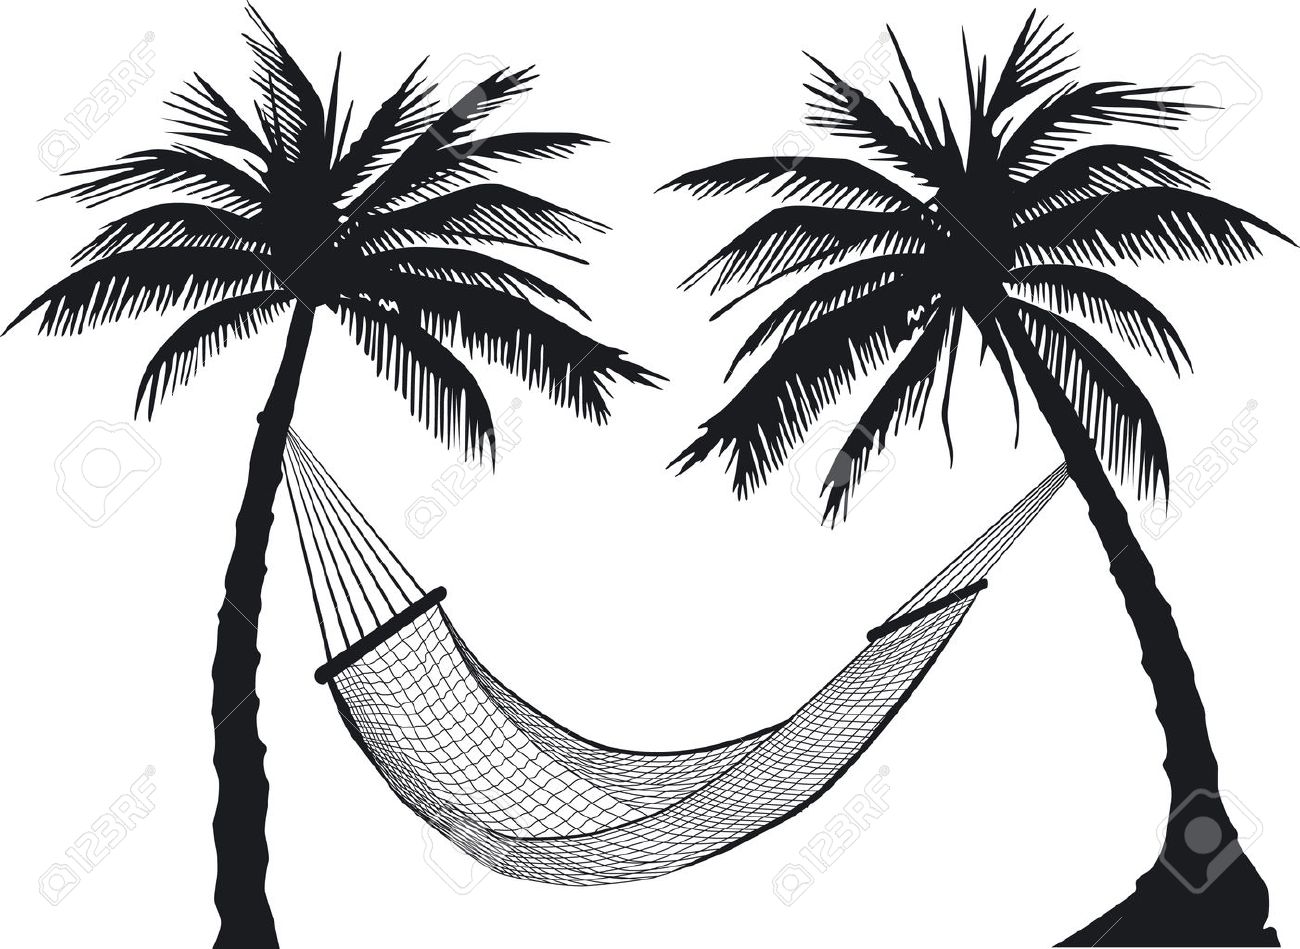 hammock clipart black and white